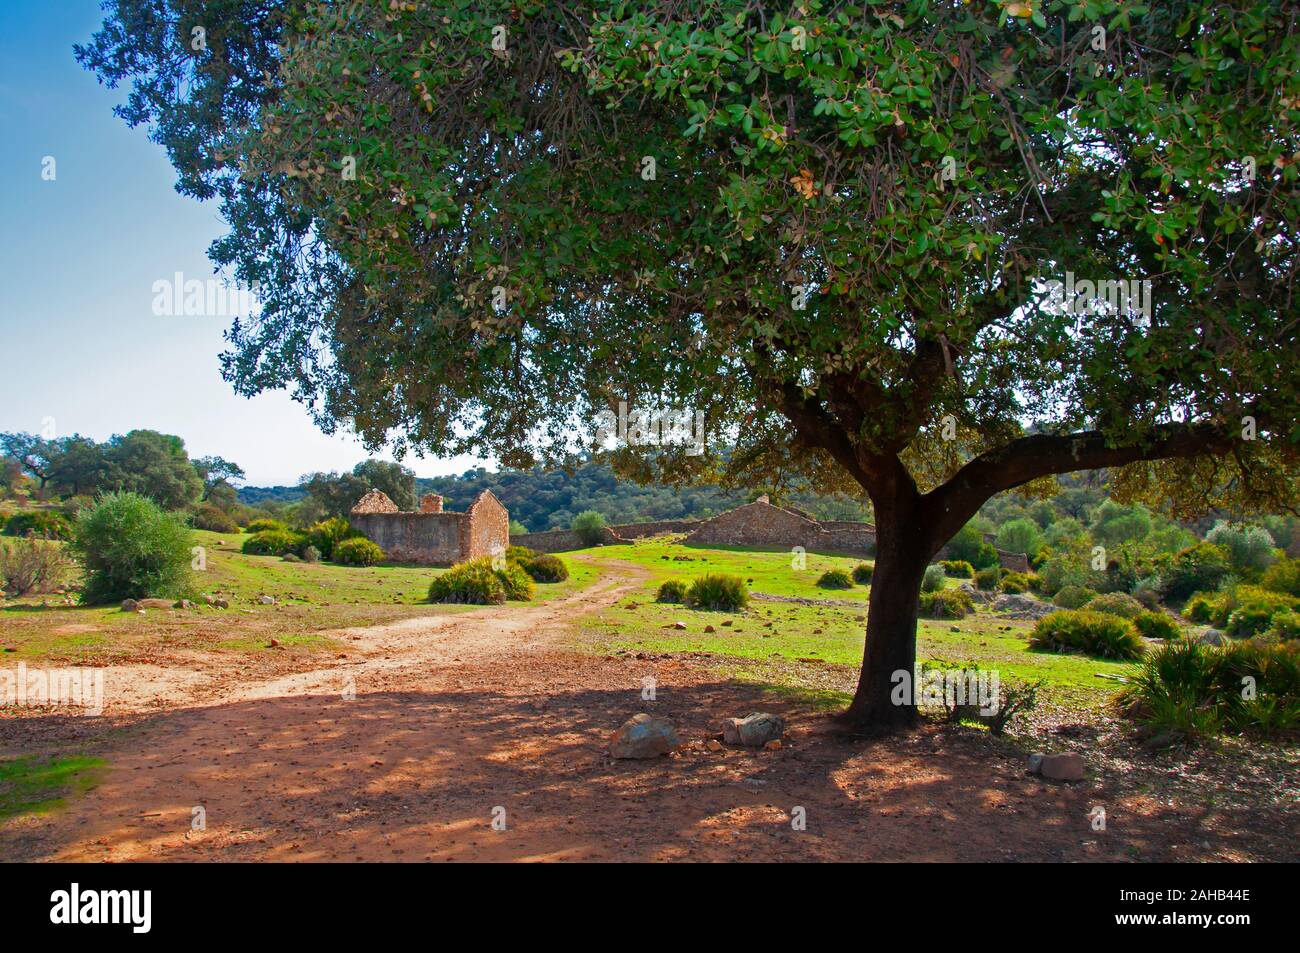 Big green olive tree giving big shadow. Wide dirt field, old ruined house. Sunny autumn day, Seville, Spain Stock Photo